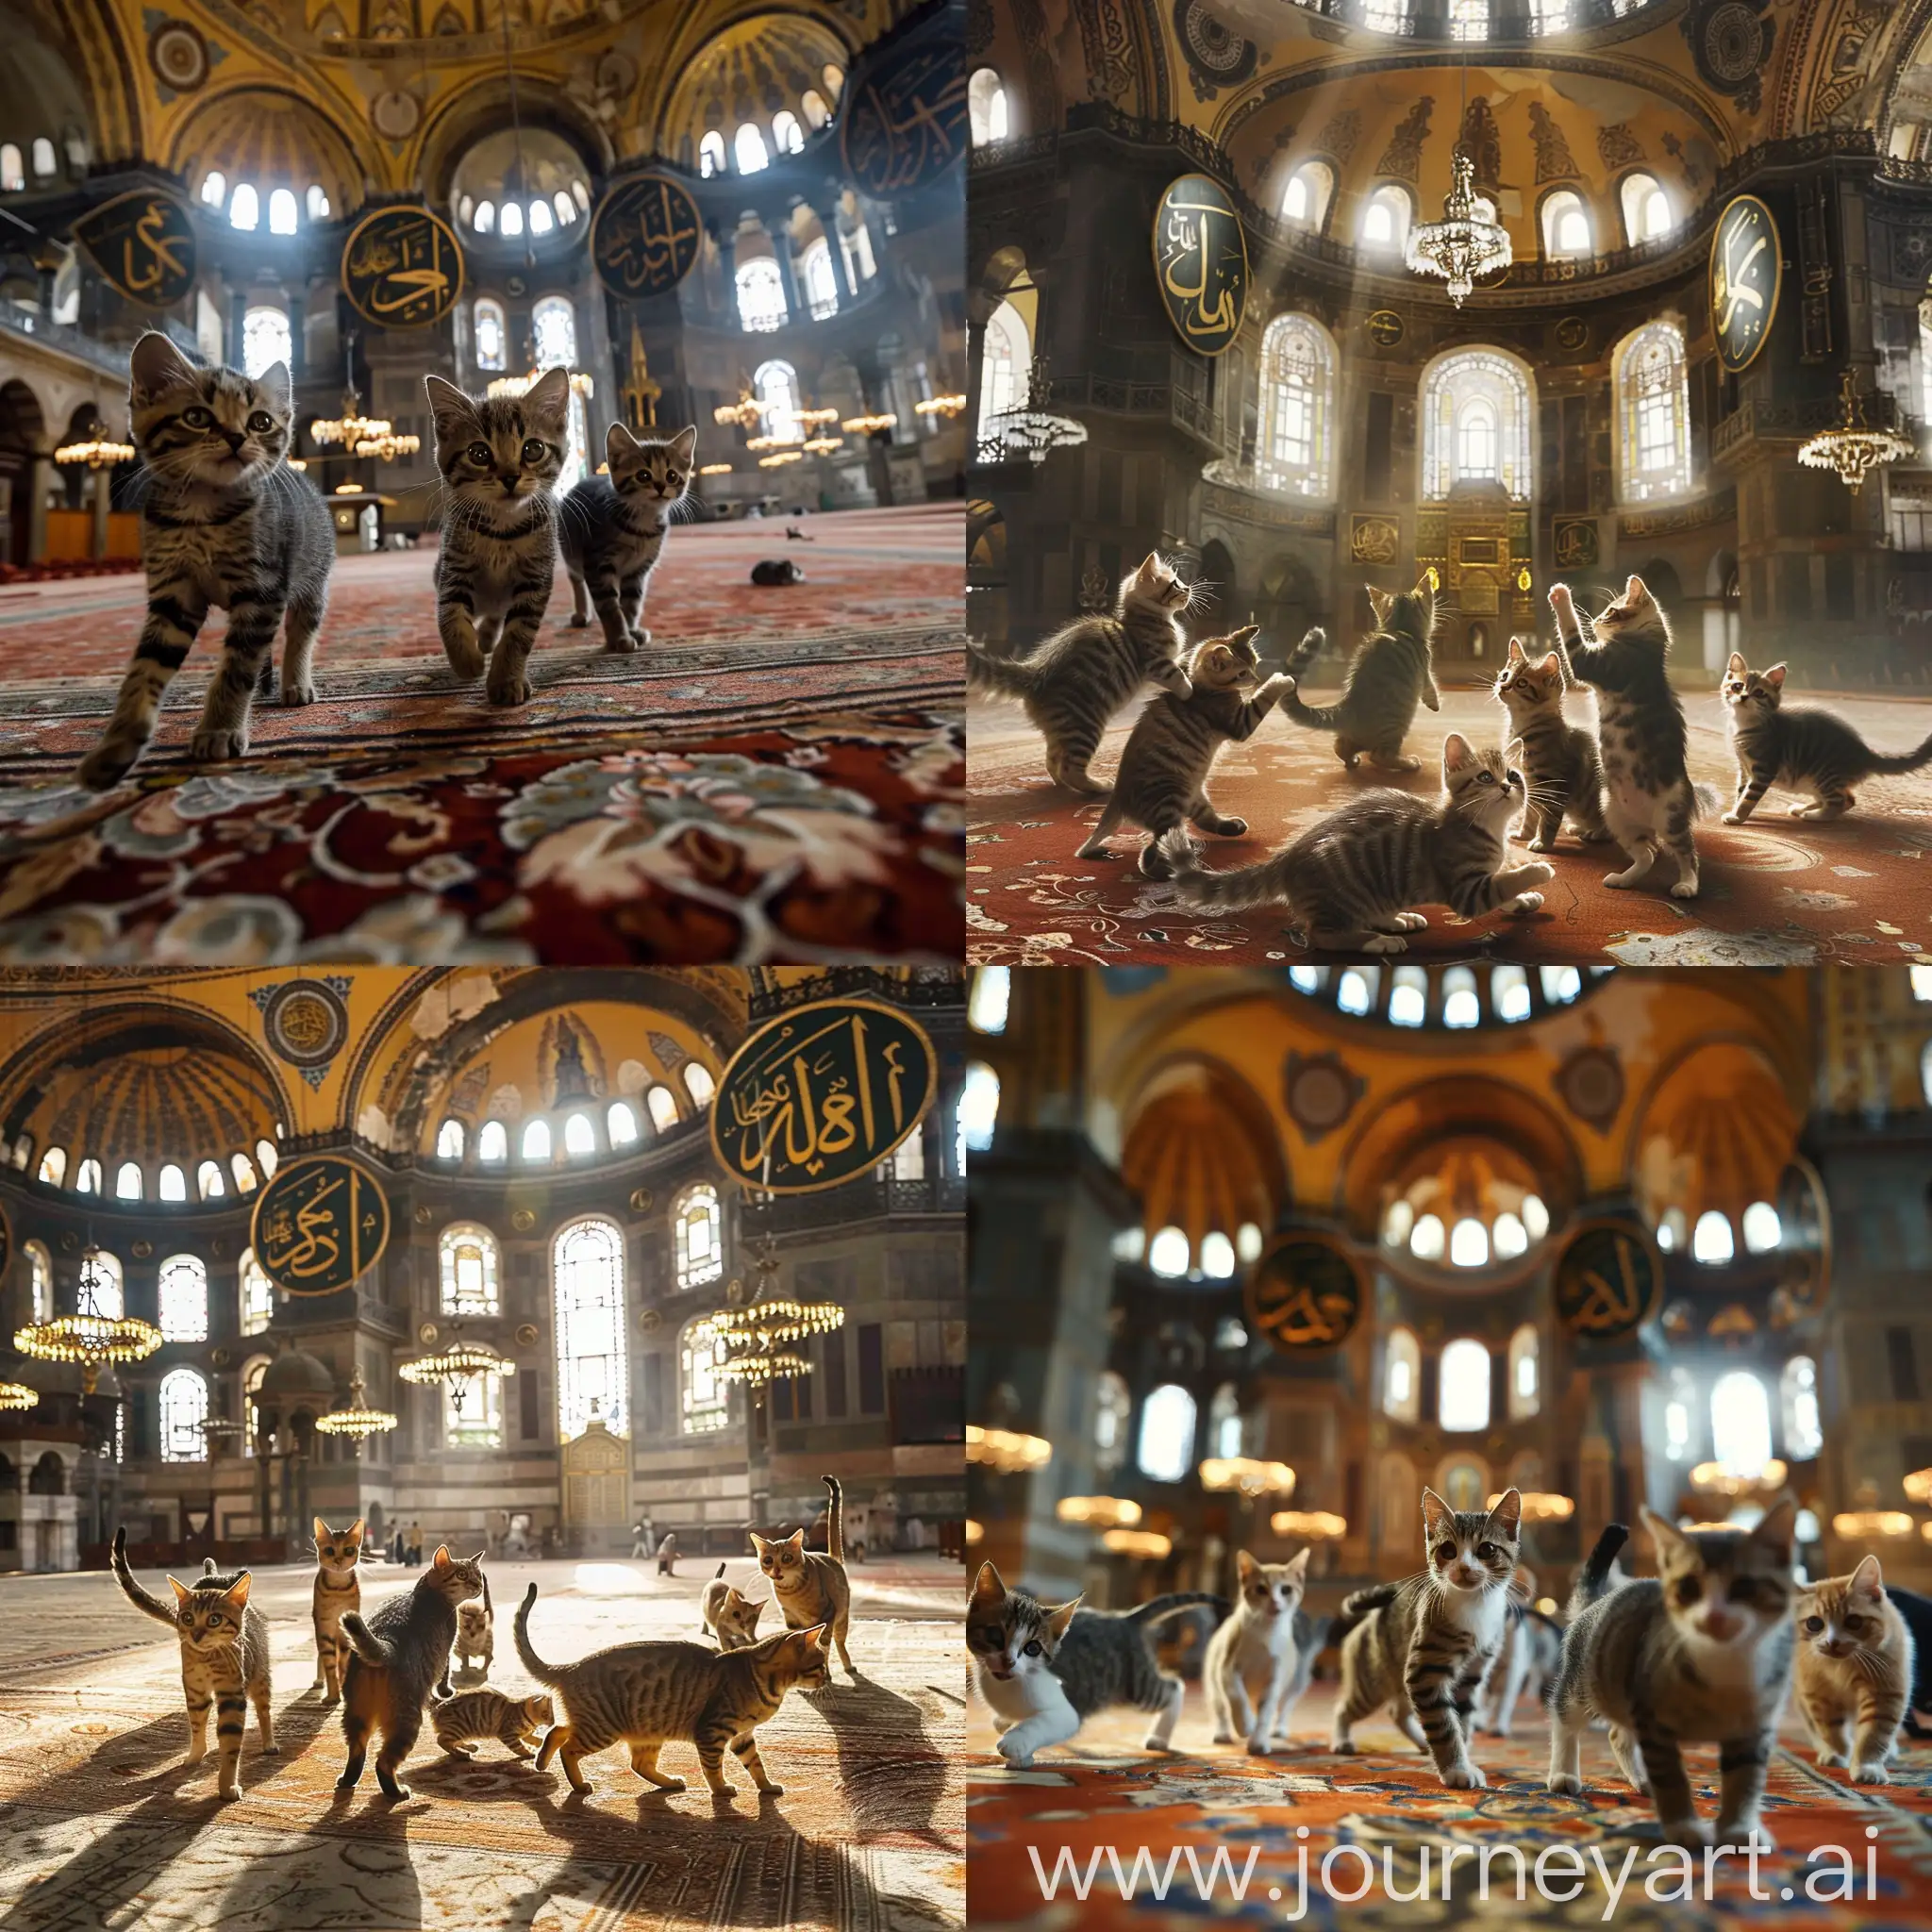 Playful-Cats-Exploring-the-Haya-Sofia-Mosque-in-Istanbul